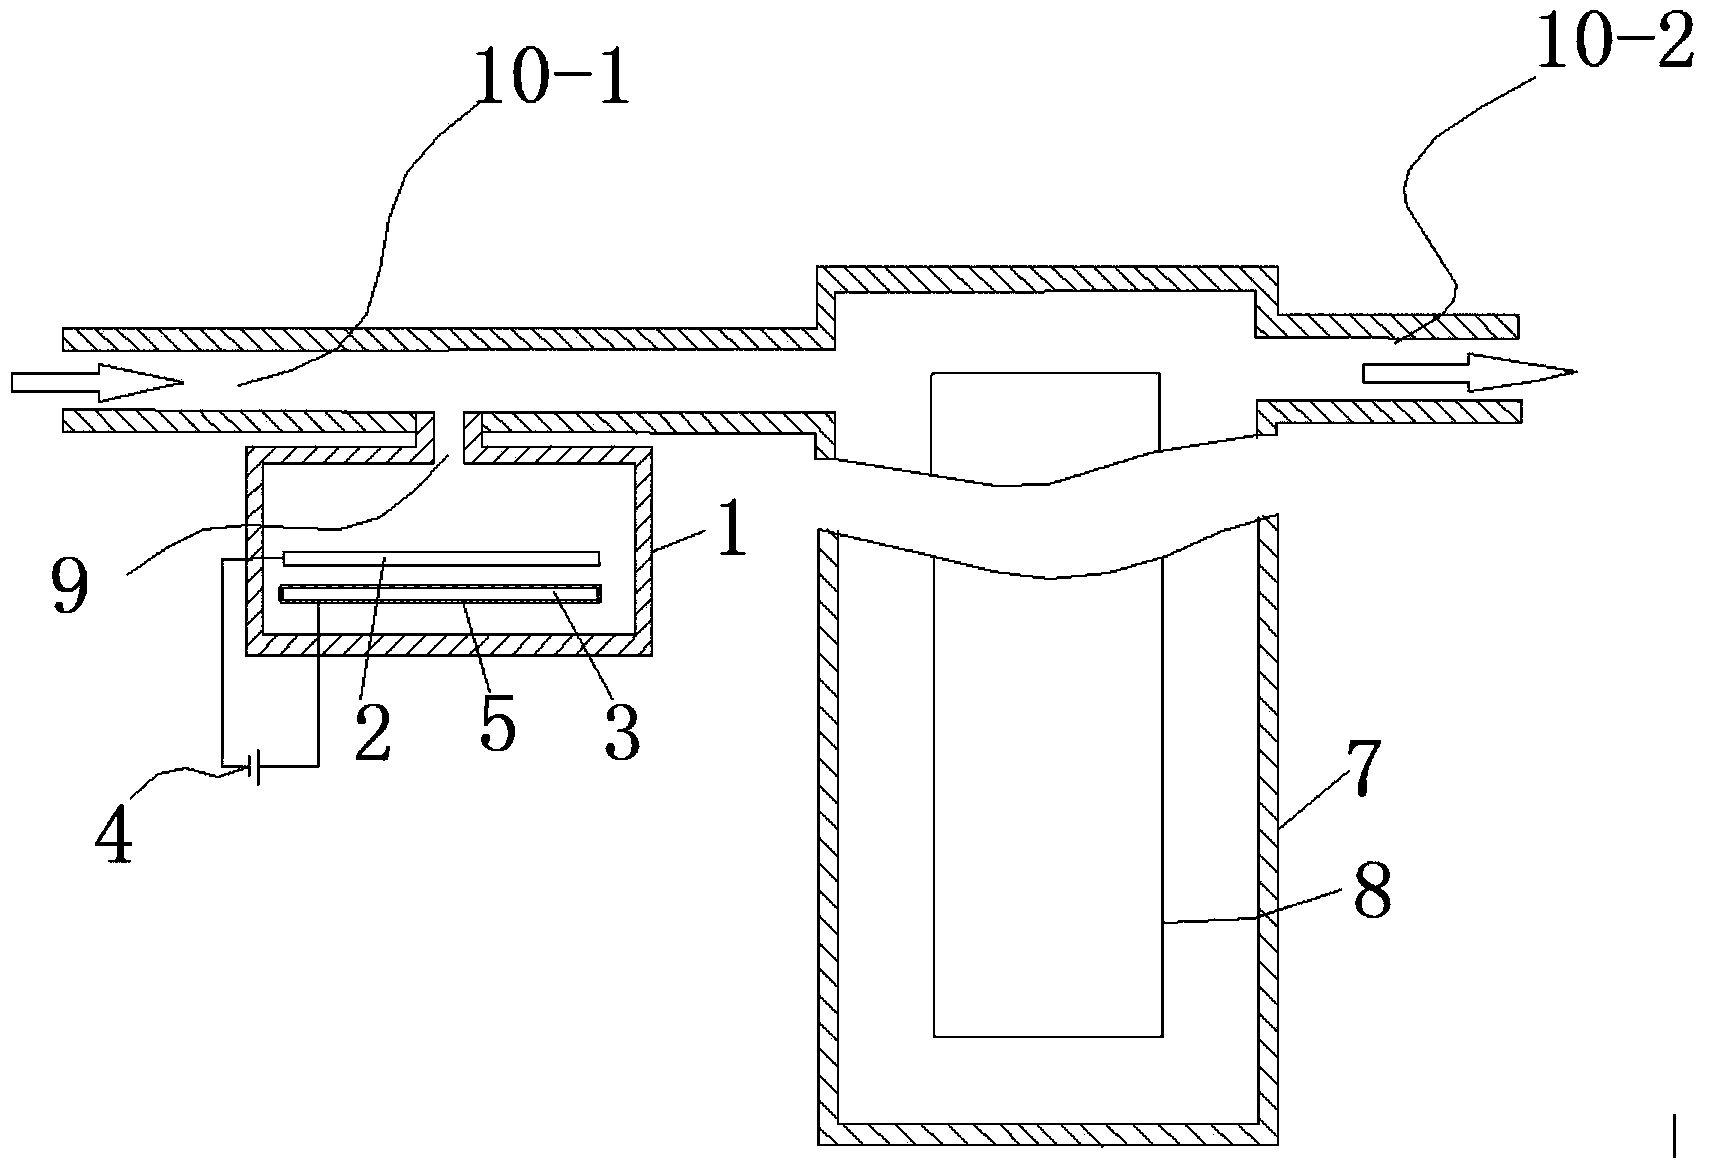 Auxiliary purification device for water purifier